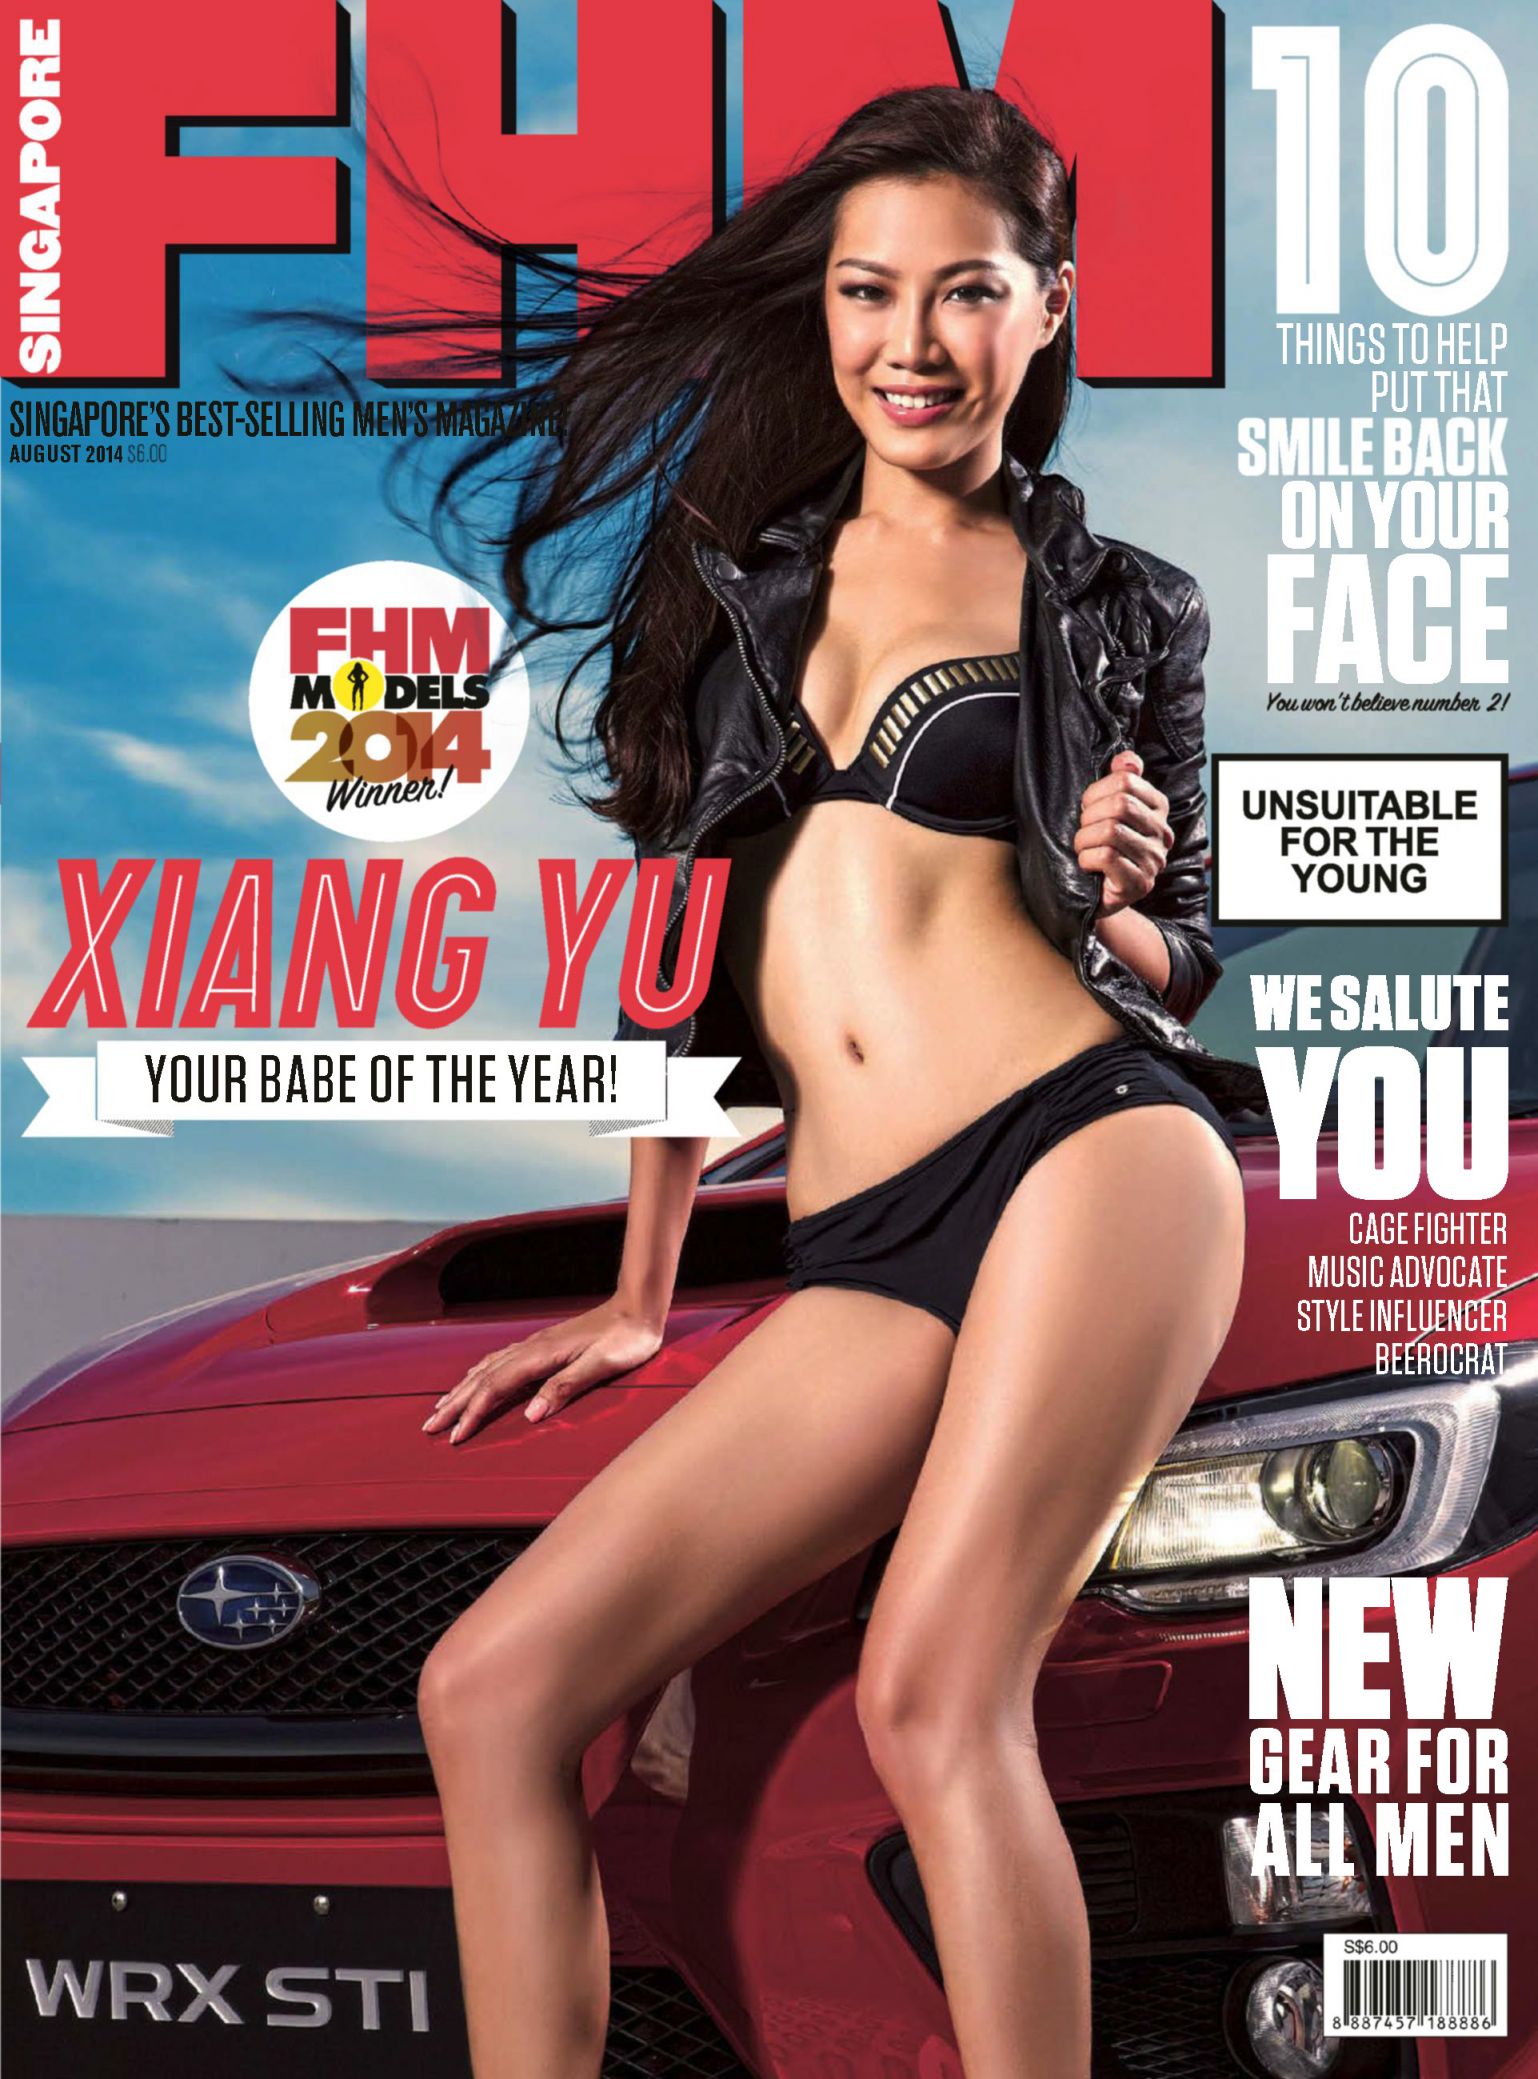 Poh Xiang Yu for FHM Magazine Singapore